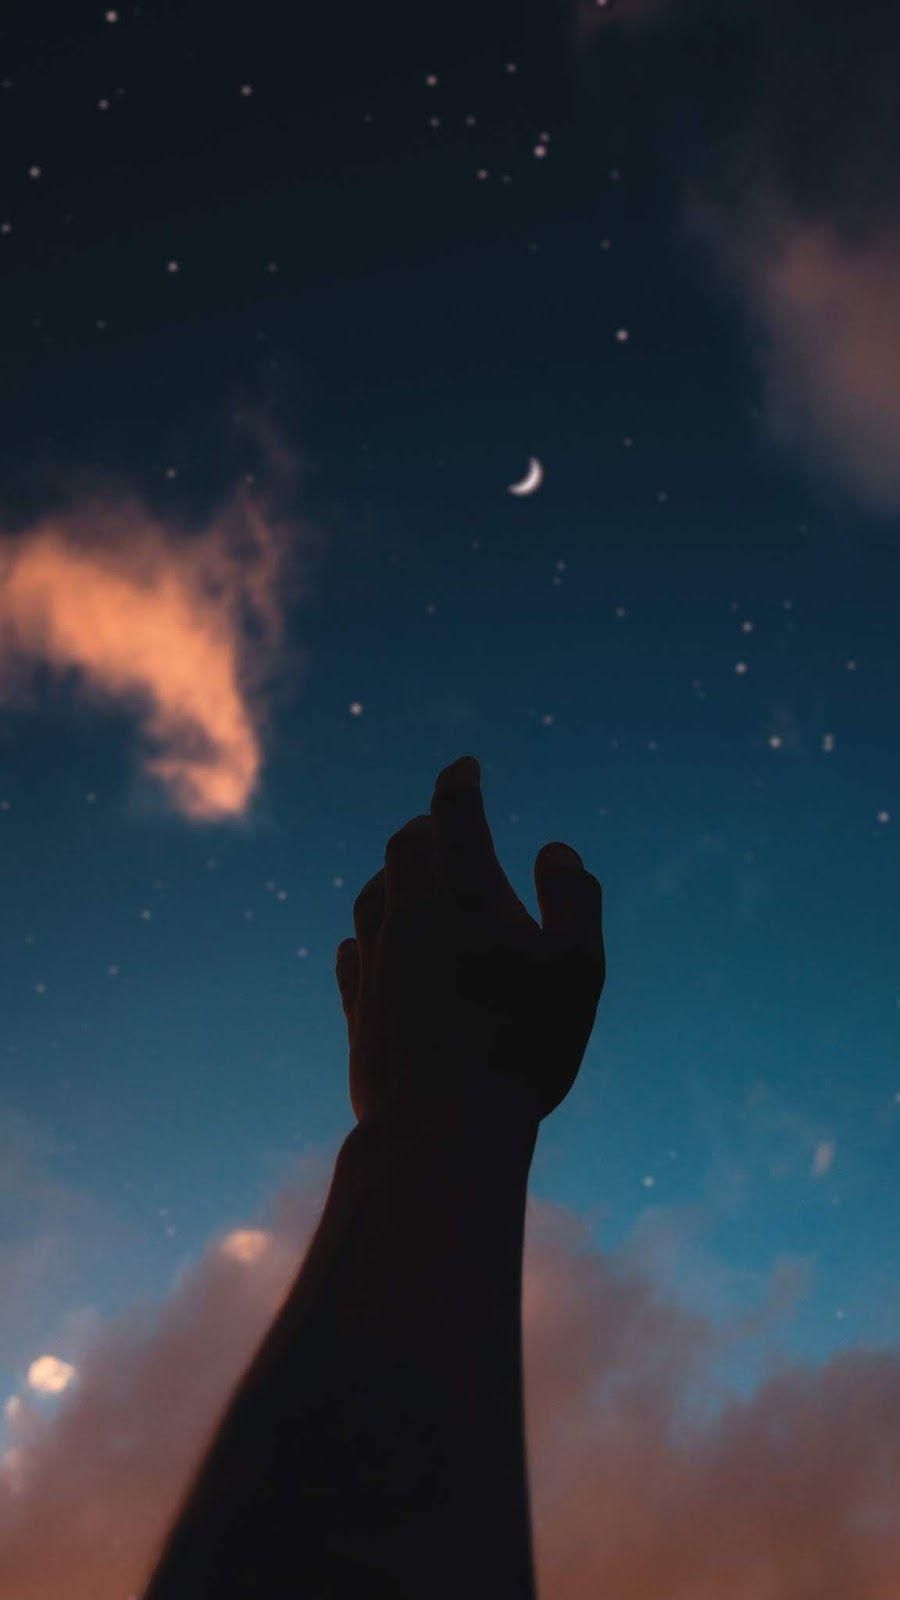 A hand reaching out to the moon - Moon